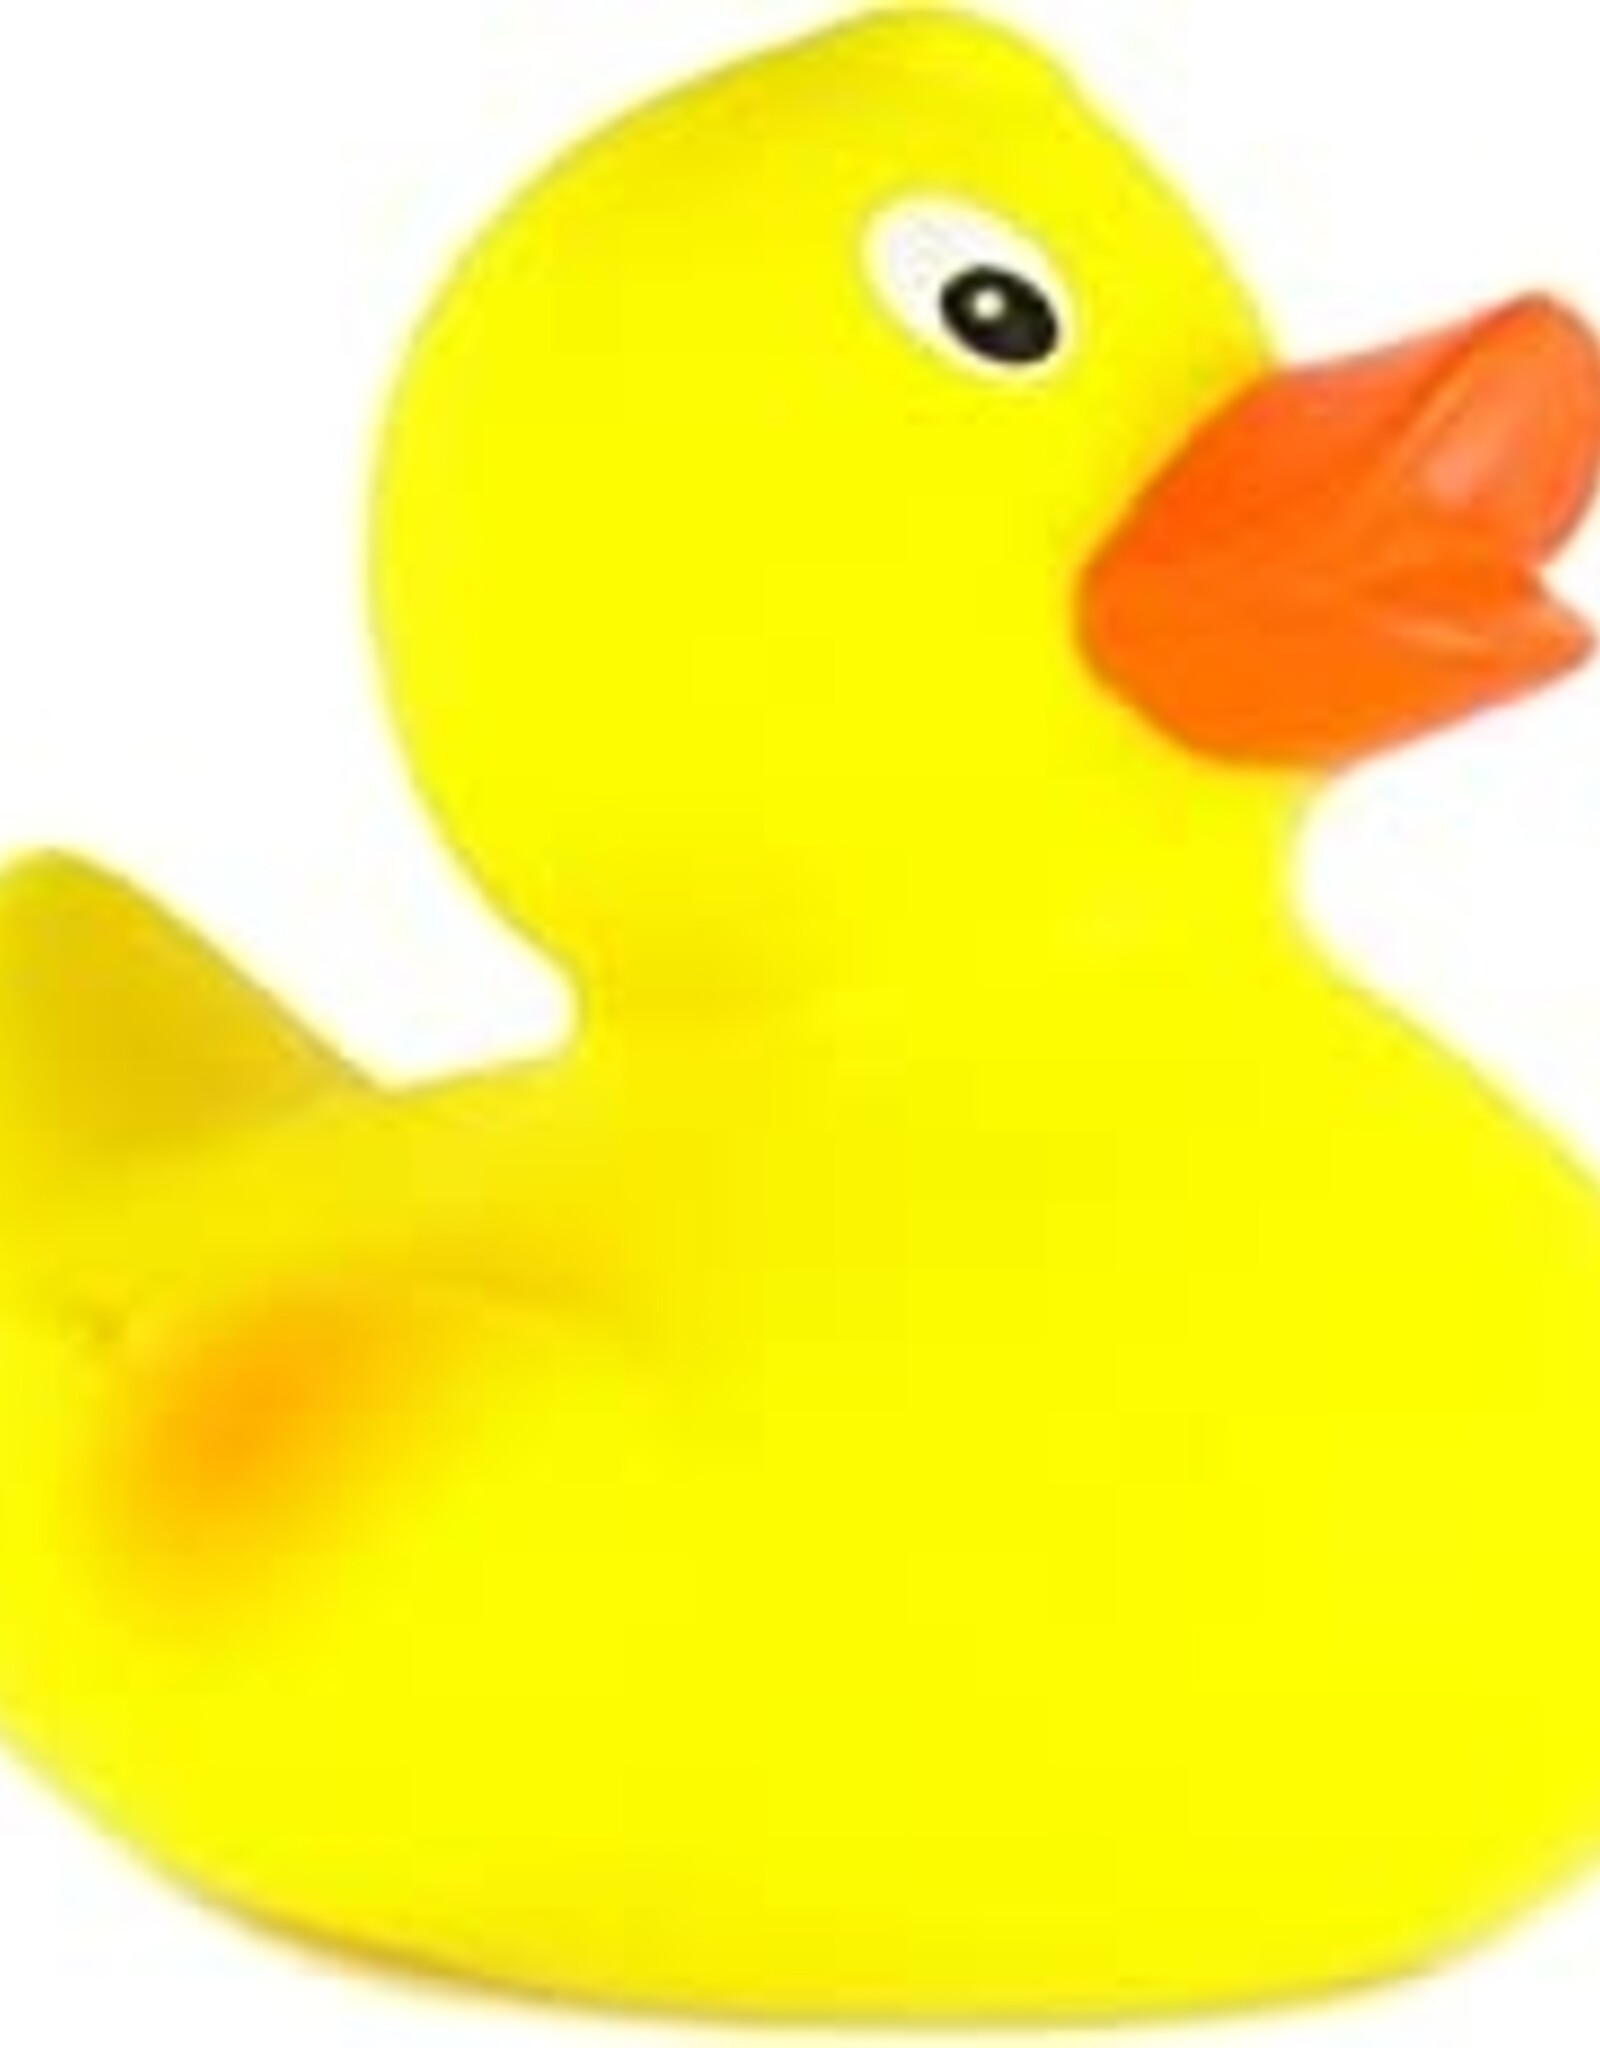 Schylling Rubber Duckies Yellow Classic